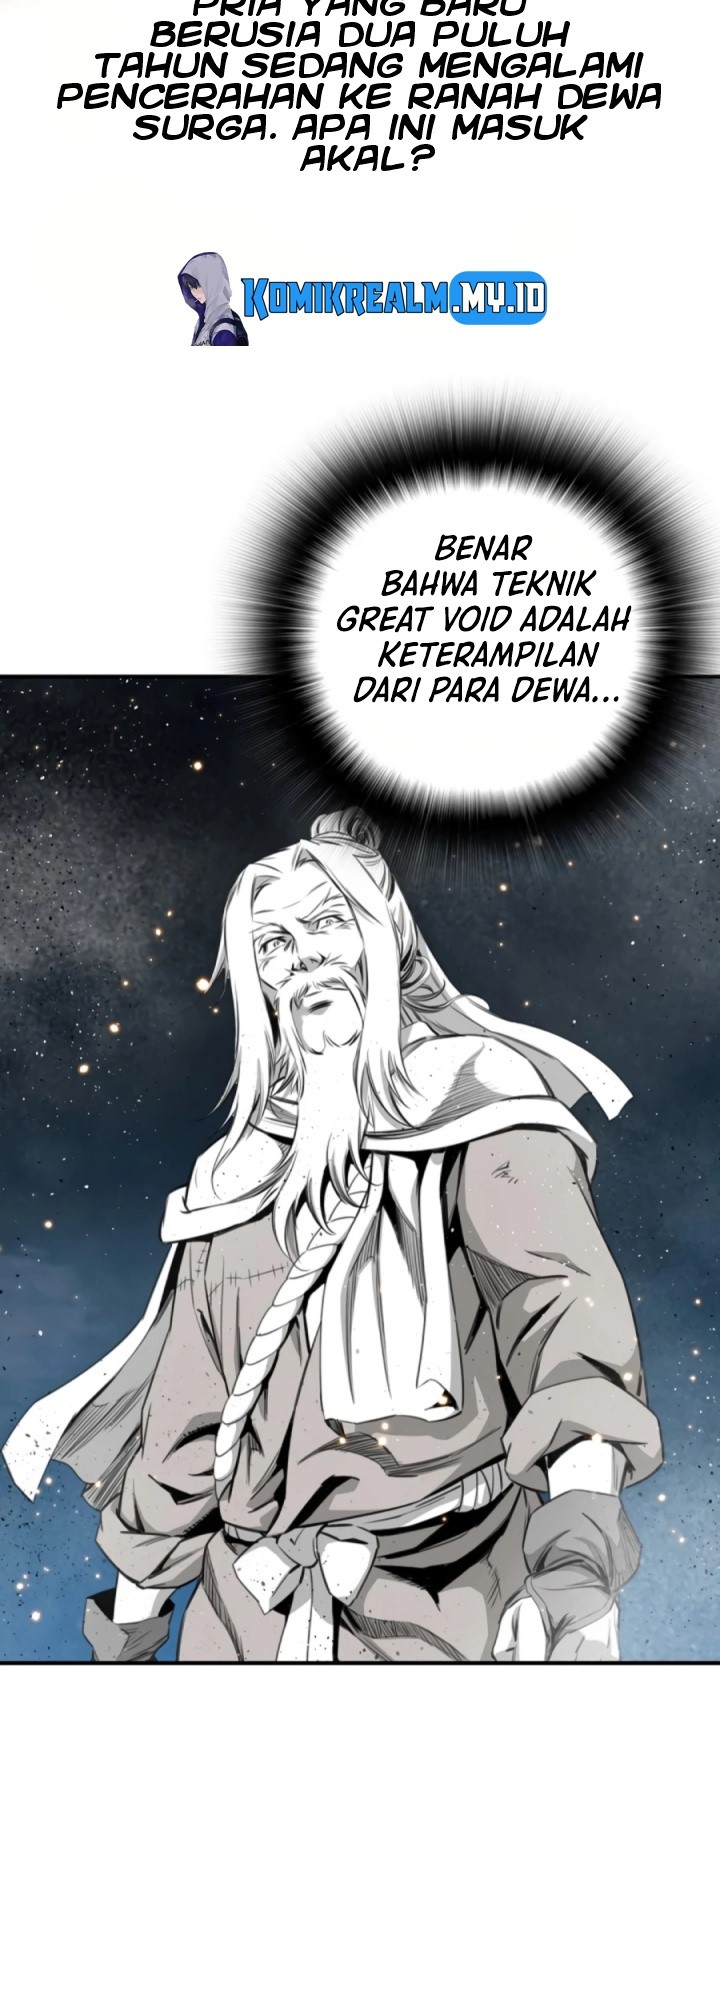 Way To Heaven Chapter 94